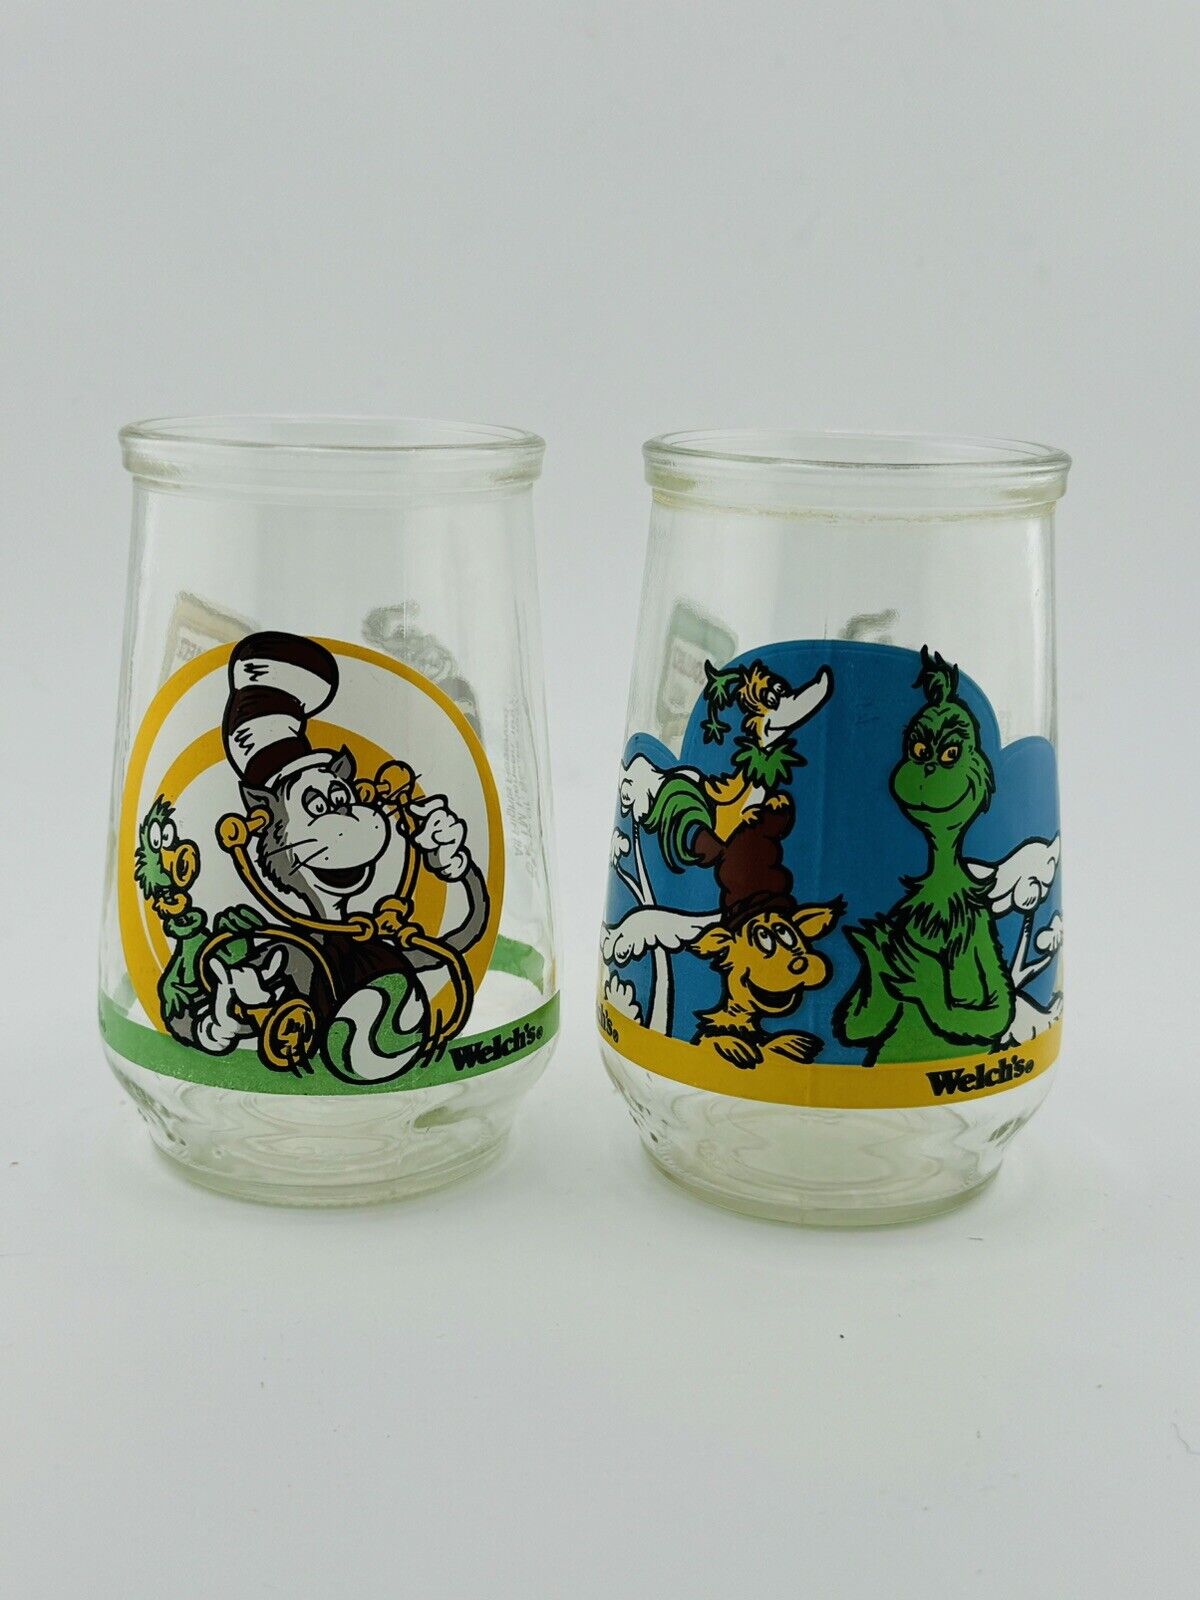 Set of 2 Vintage 1996Welch\'s Jelly Jar Glasses Dr Seuss #1 and #3